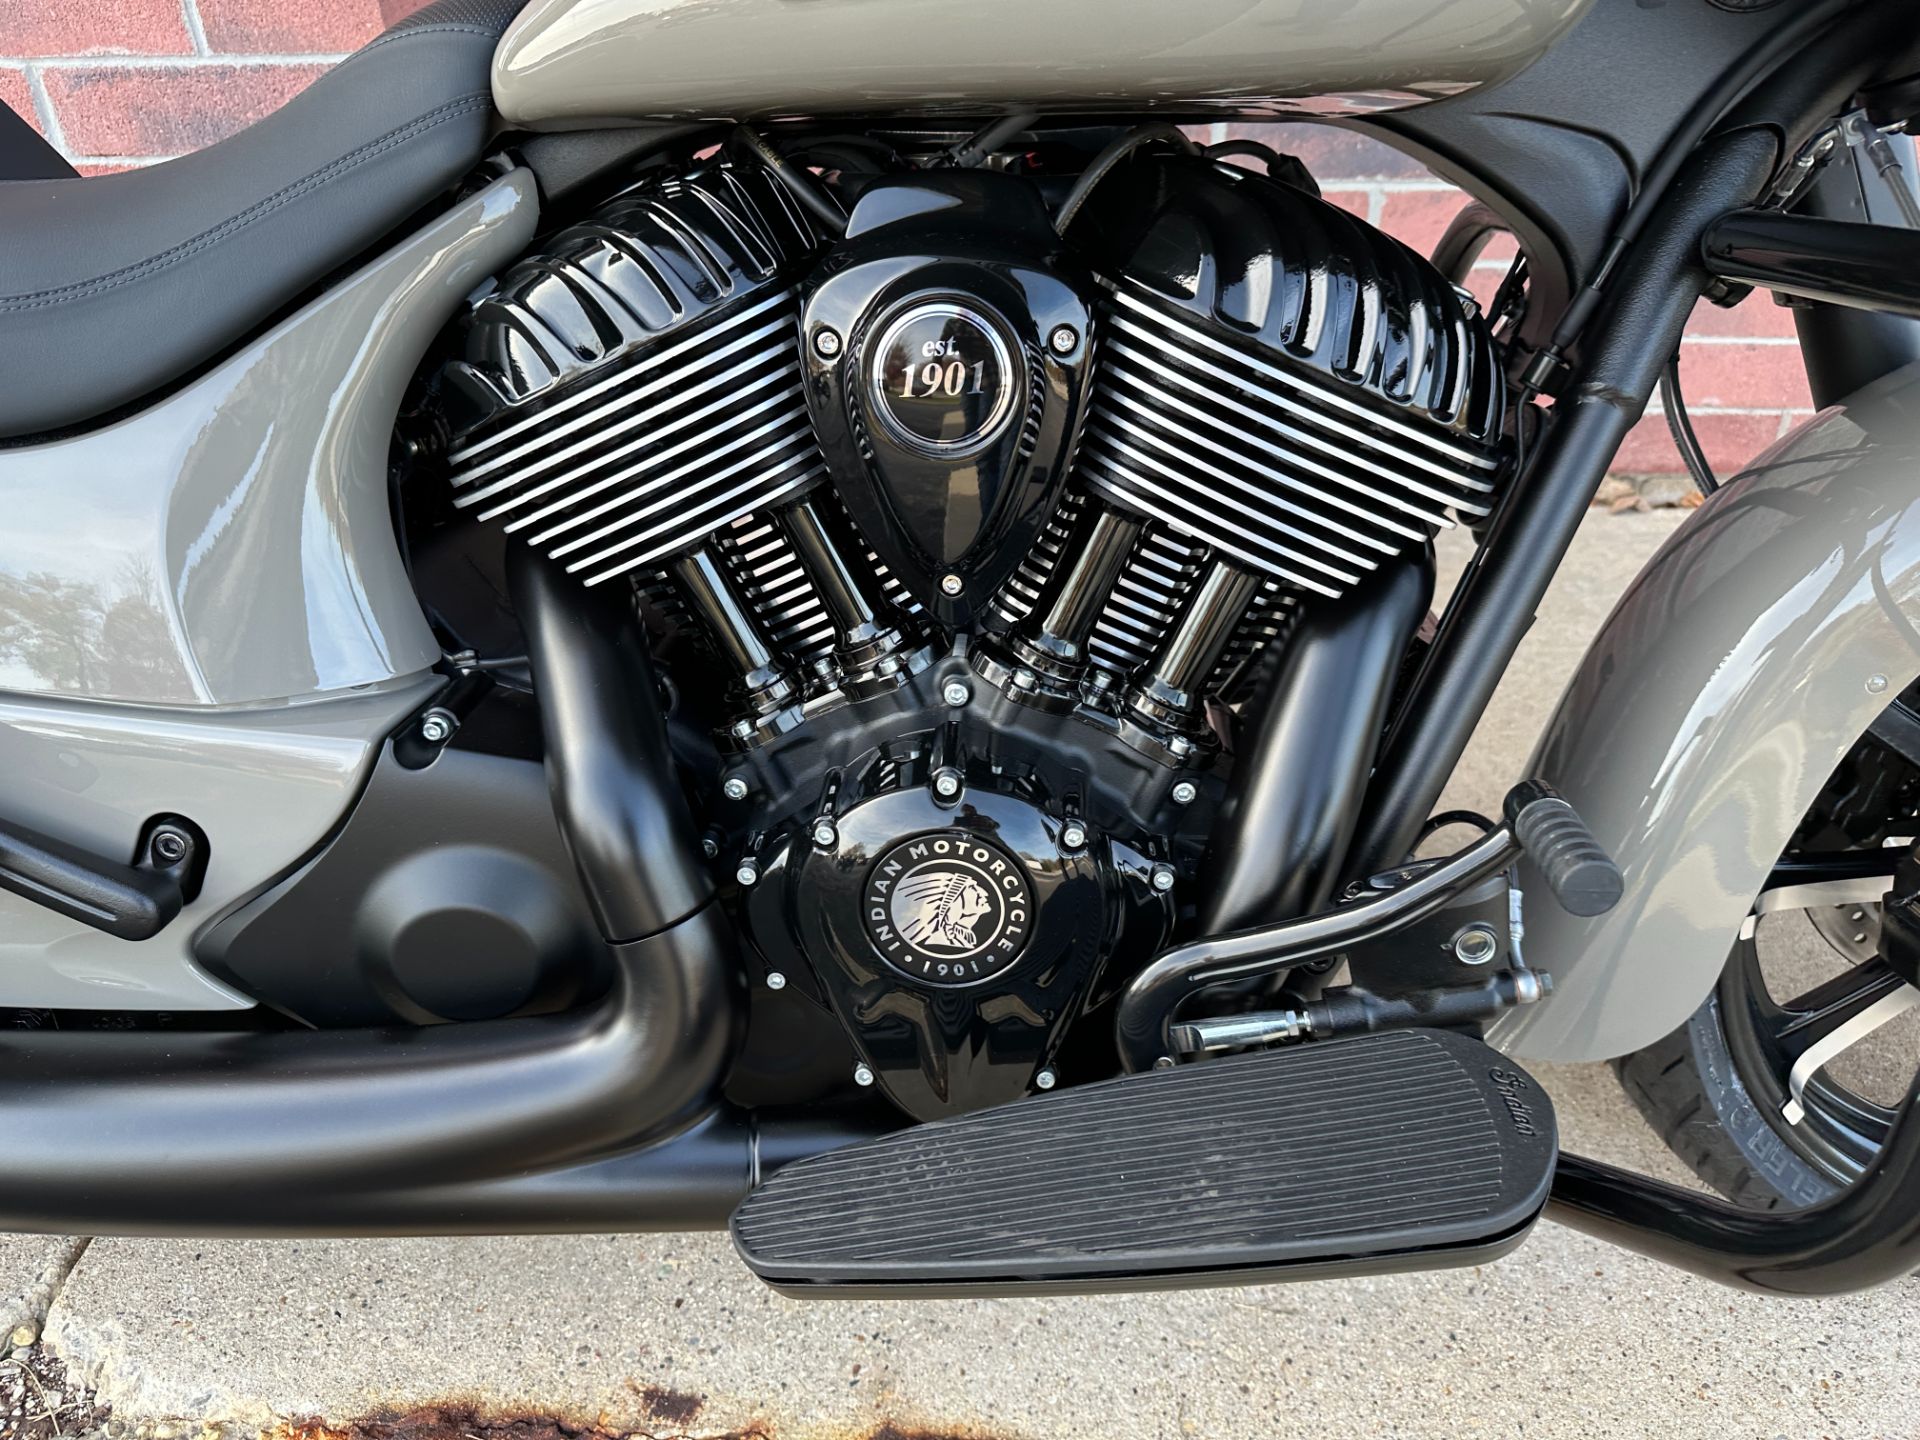 2022 Indian Motorcycle Chieftain® Dark Horse® in Muskego, Wisconsin - Photo 5